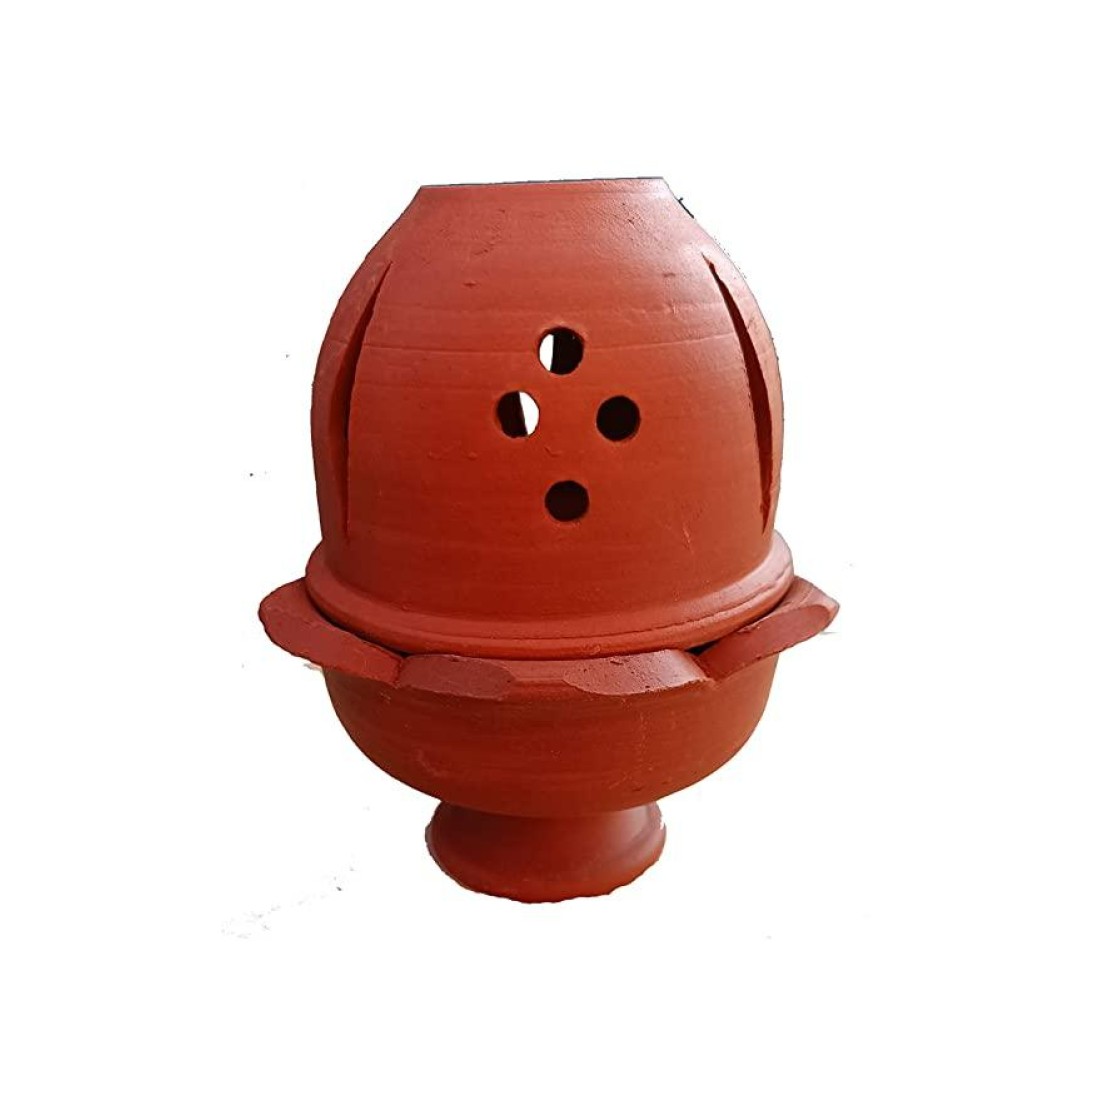 Tillage-Terracotta Clay Oil lamp Decorative Diya with lid for Home Decoration & Puja (Closed LAMP -2) 1